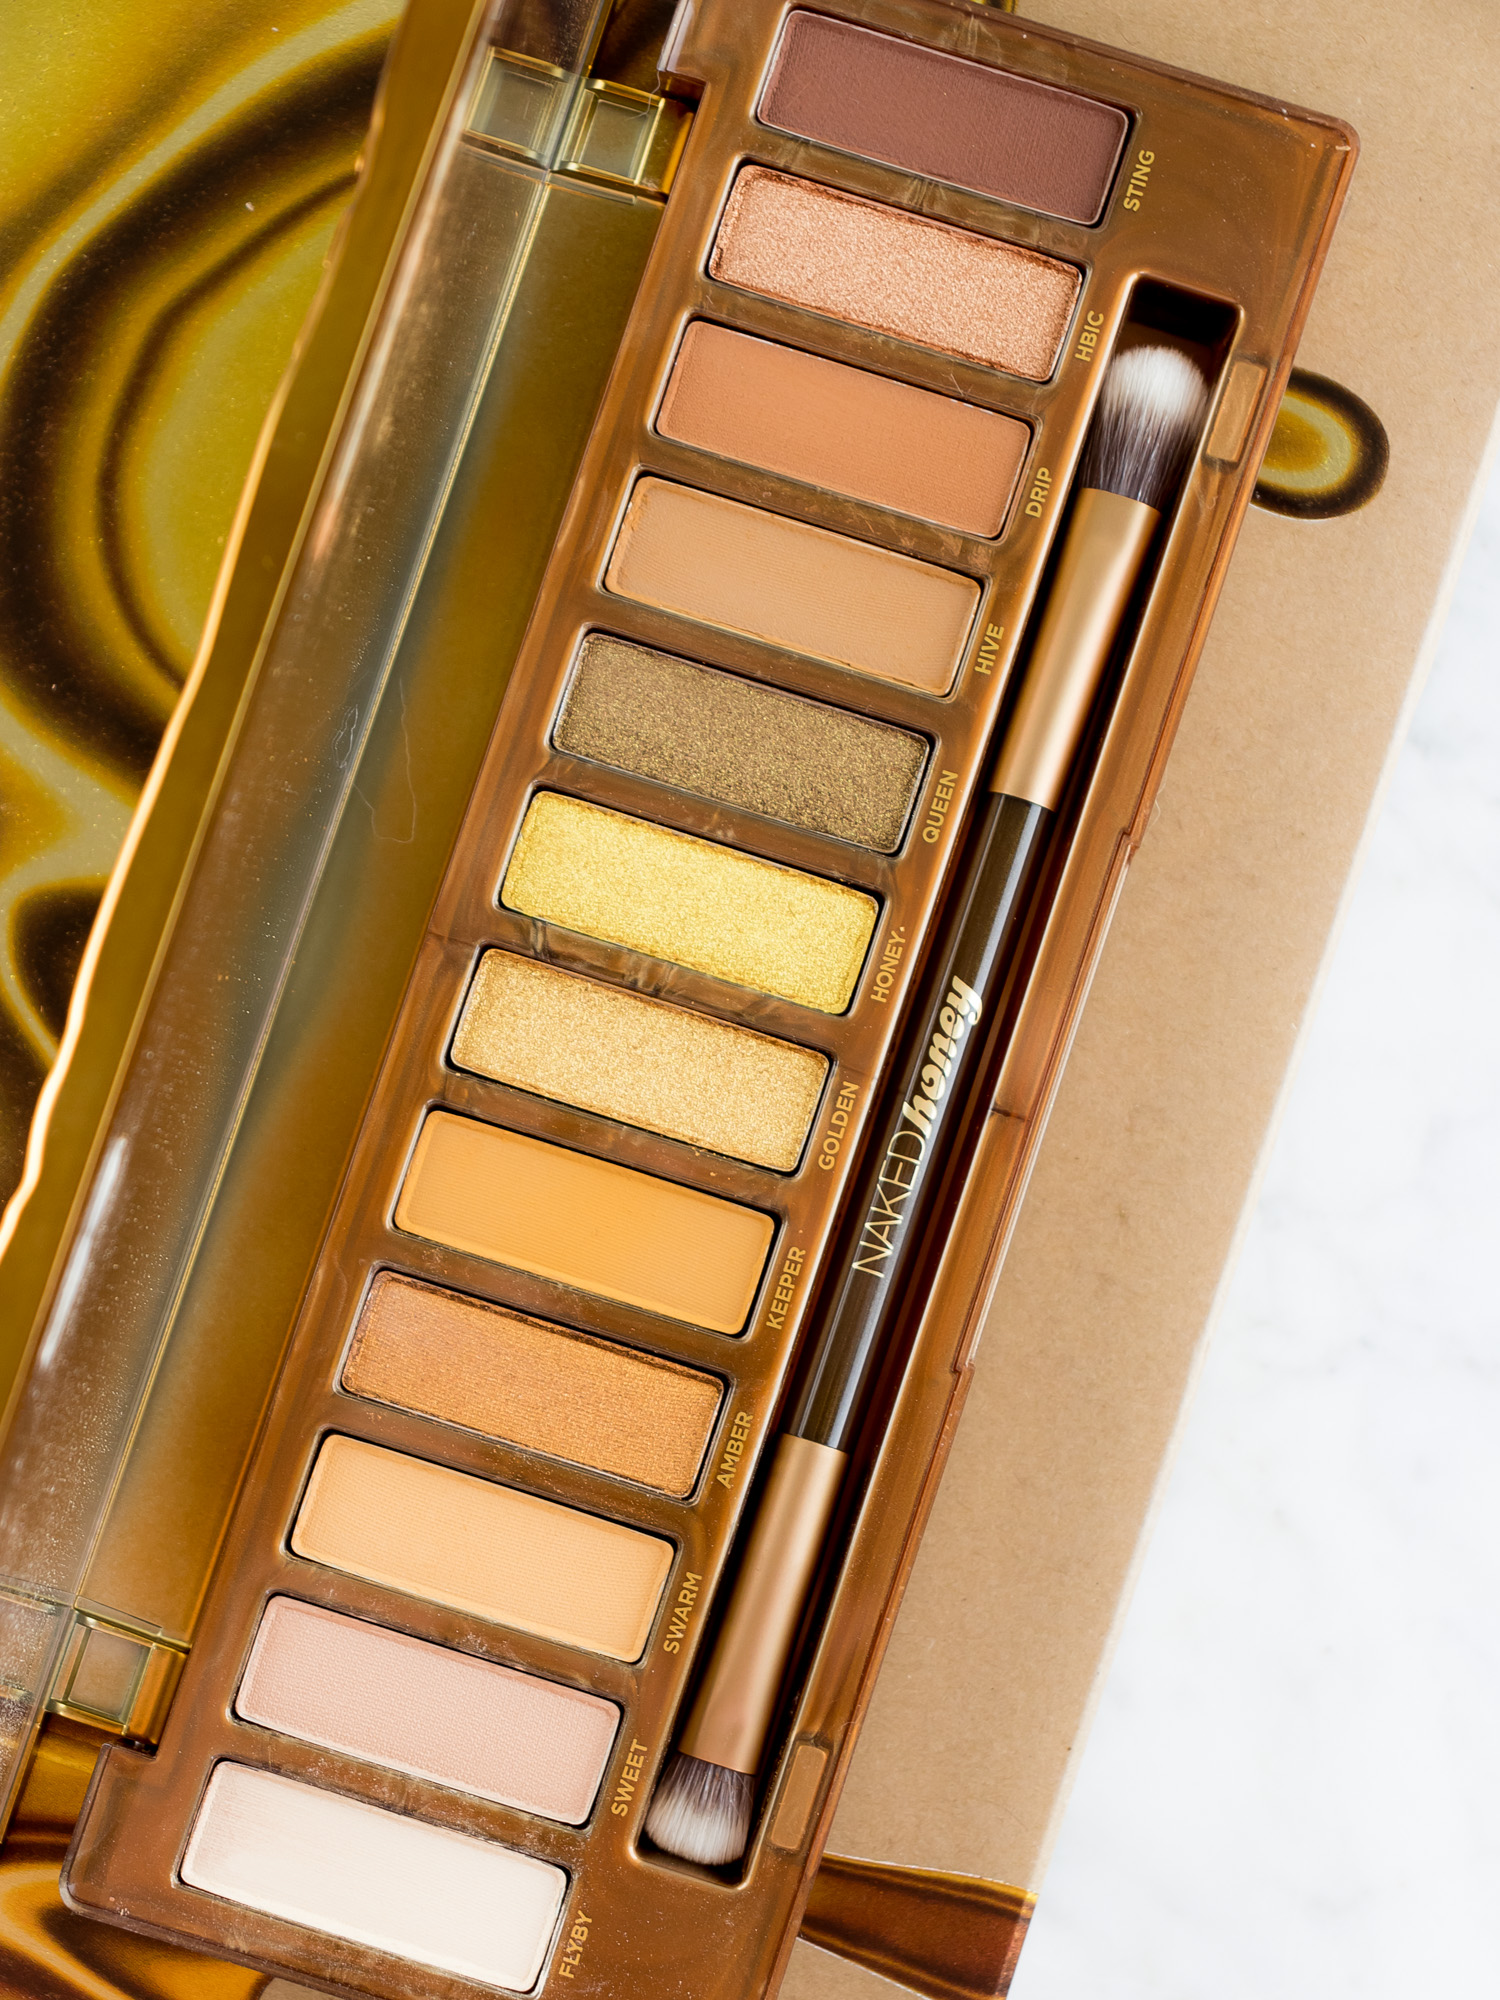 Urban Decay Naked Honey Eyeshadow Palette | Review and 